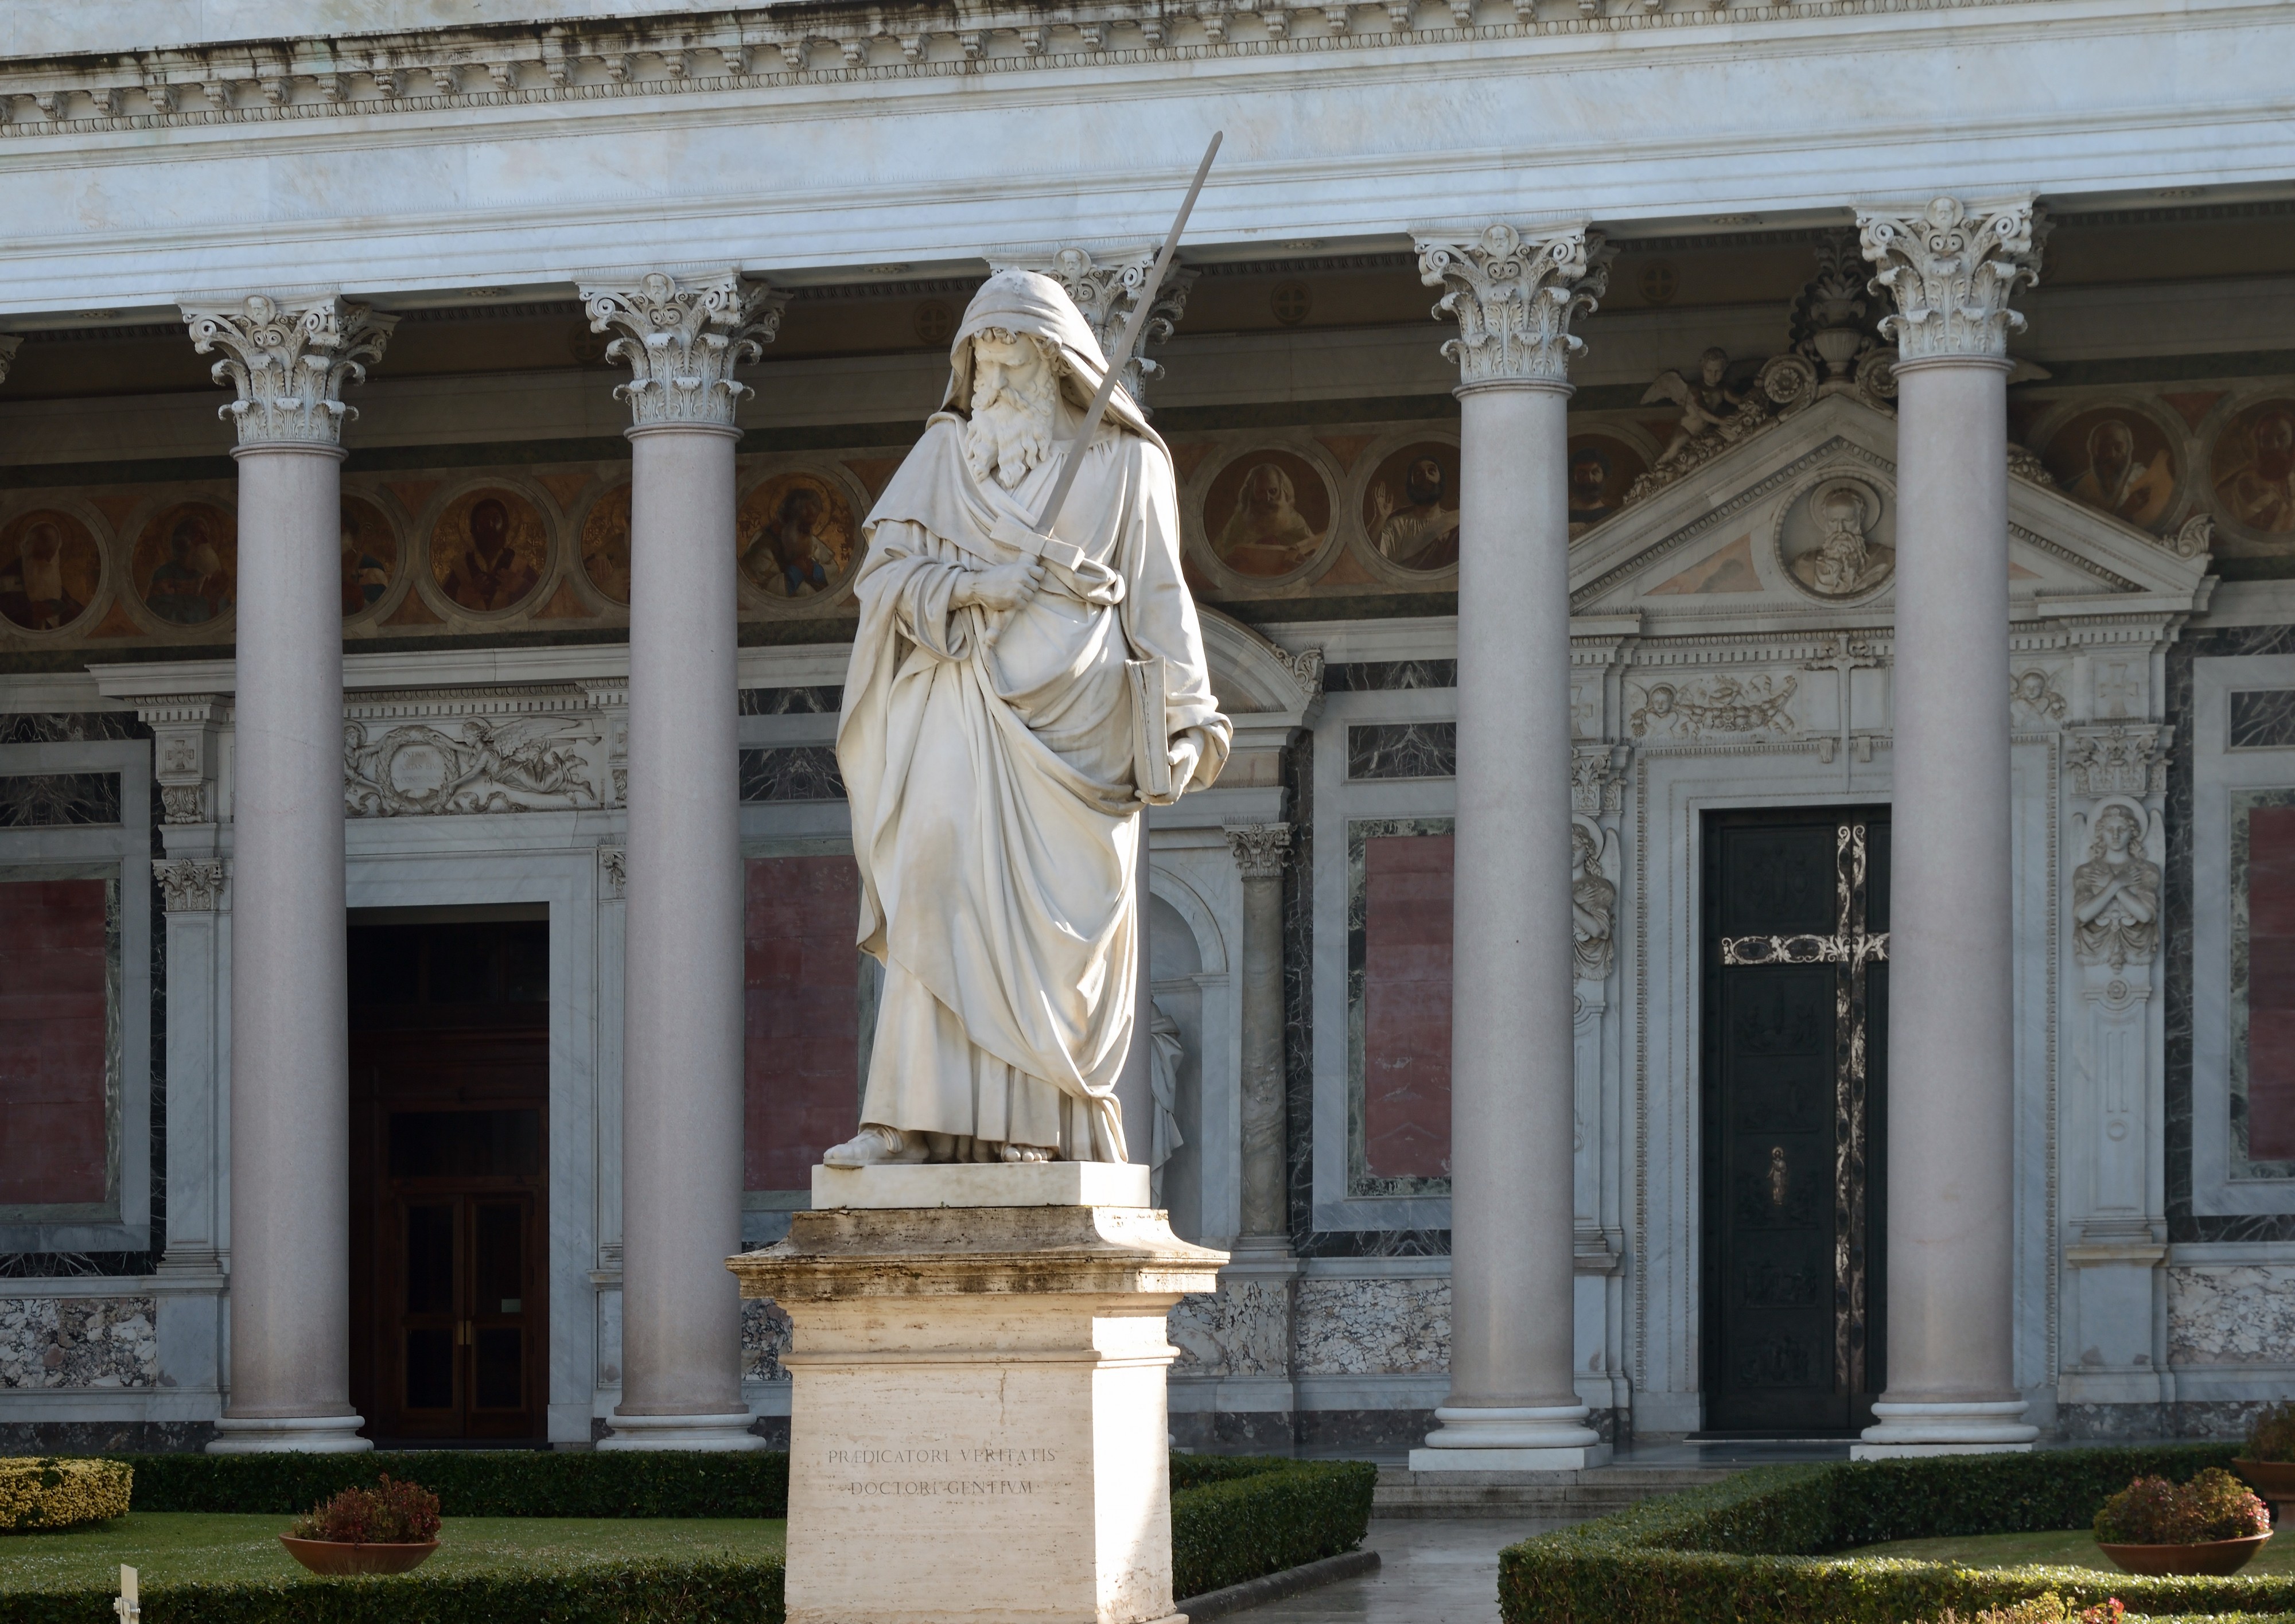 Statue and Colonnade of Saint Paul in Rome